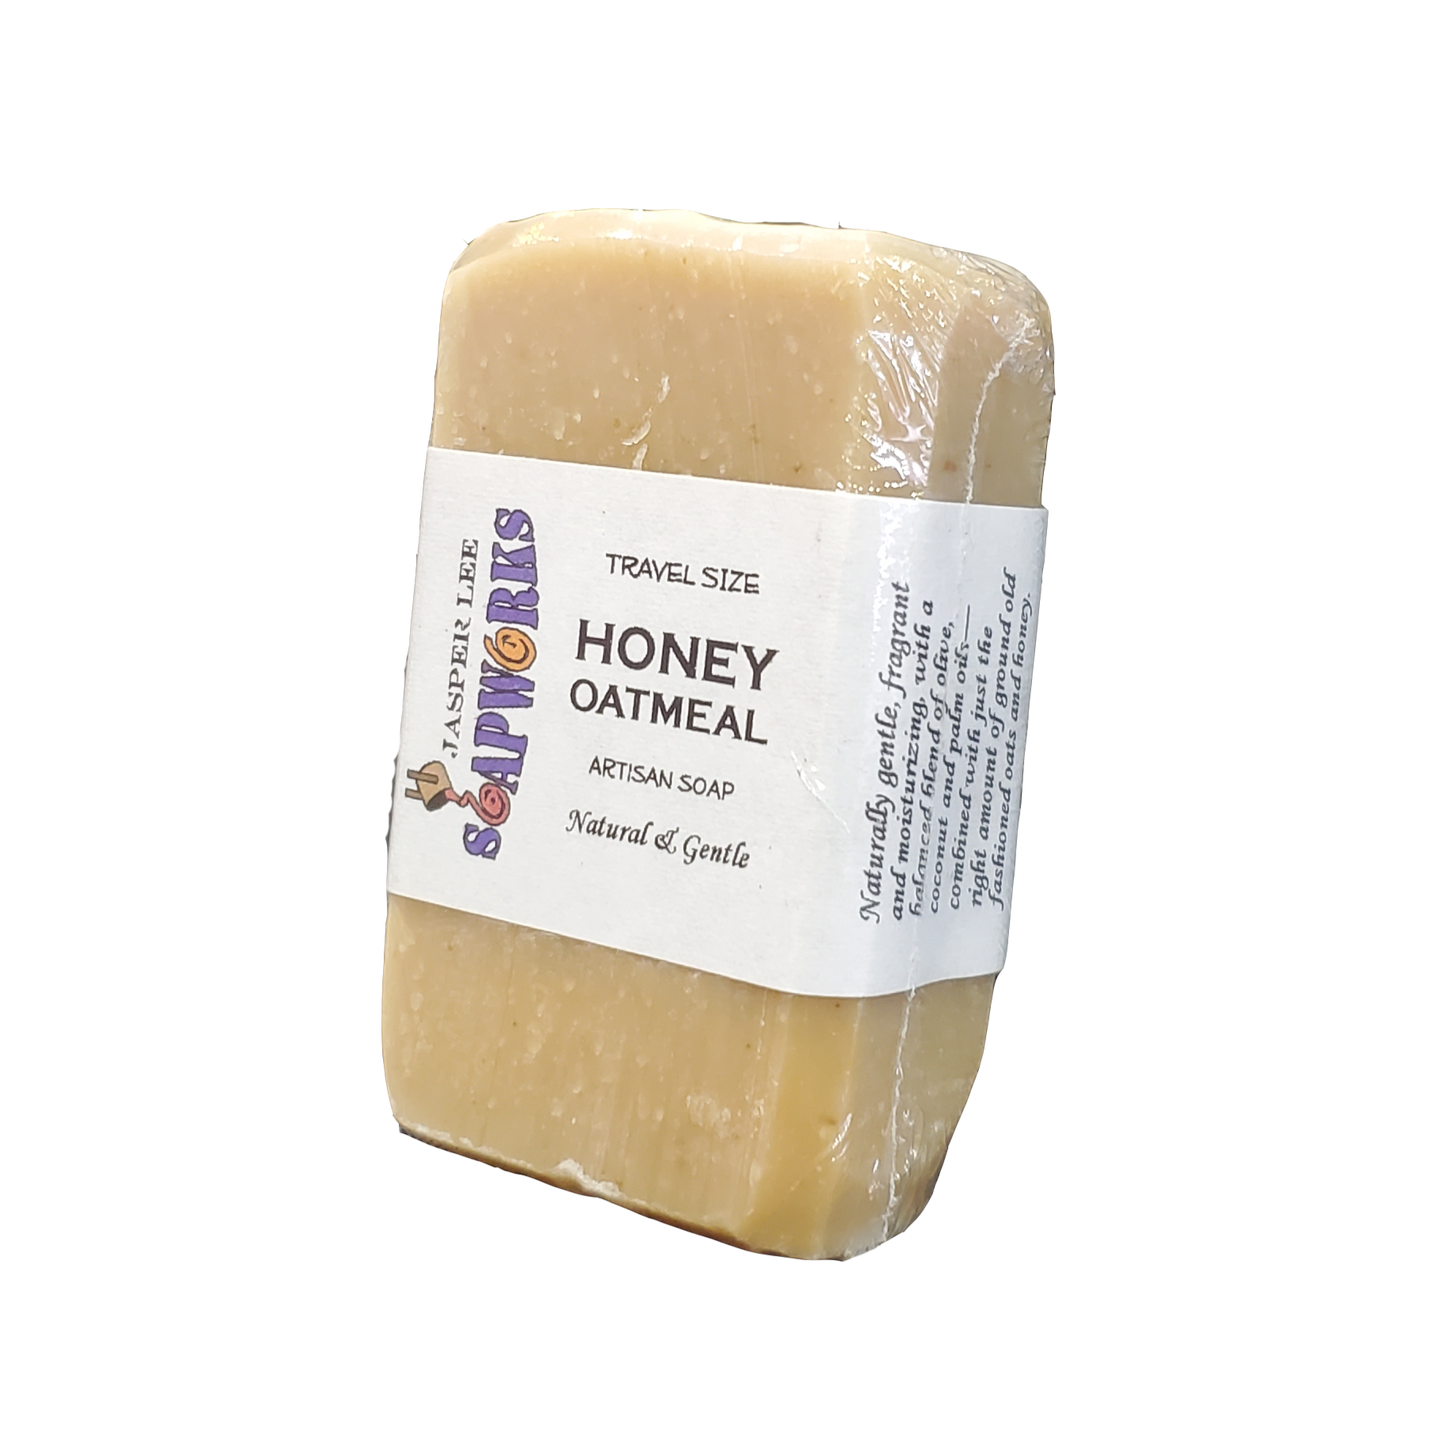 Travel size Honey Oatmeal soap bar in clear biodegradable packaging